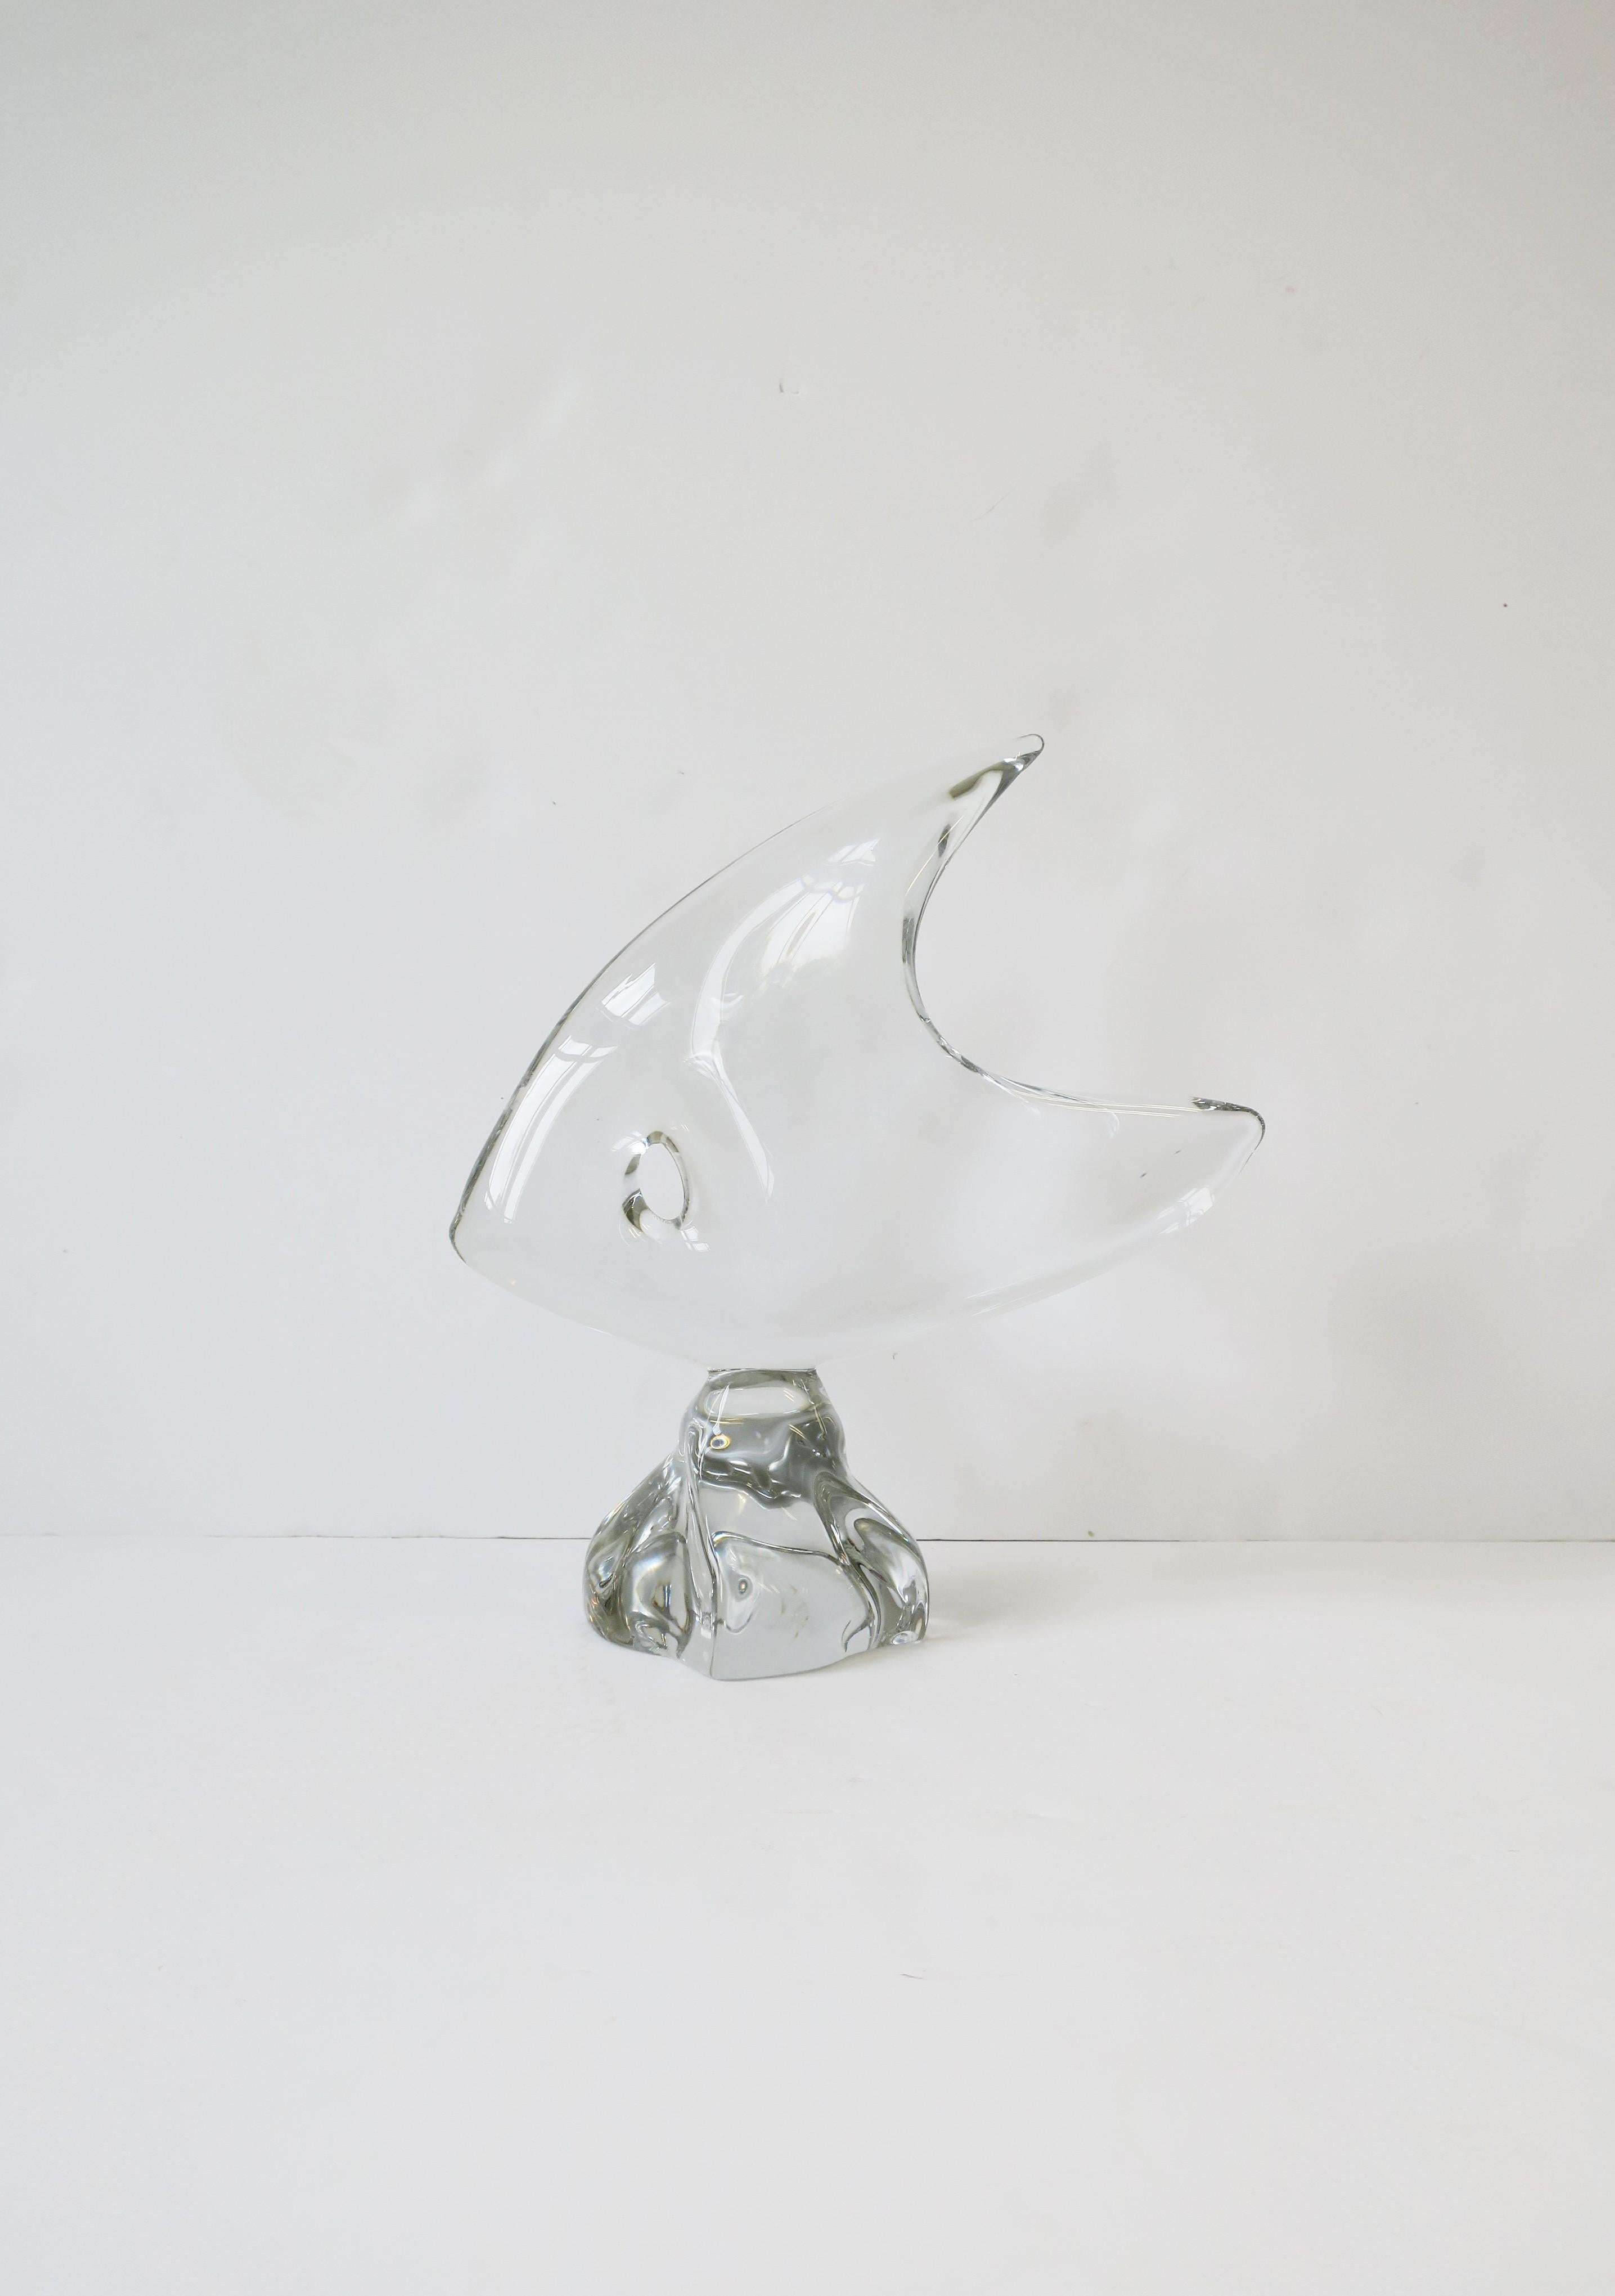 A beautiful, substantial, and rare French crystal art glass tropical fish sculpture decorative object from Cristallerie Moser-Millot, circa mid-20th century, Paris, France. With maker's mark on bottom as shown in image #13. Piece is a nice size